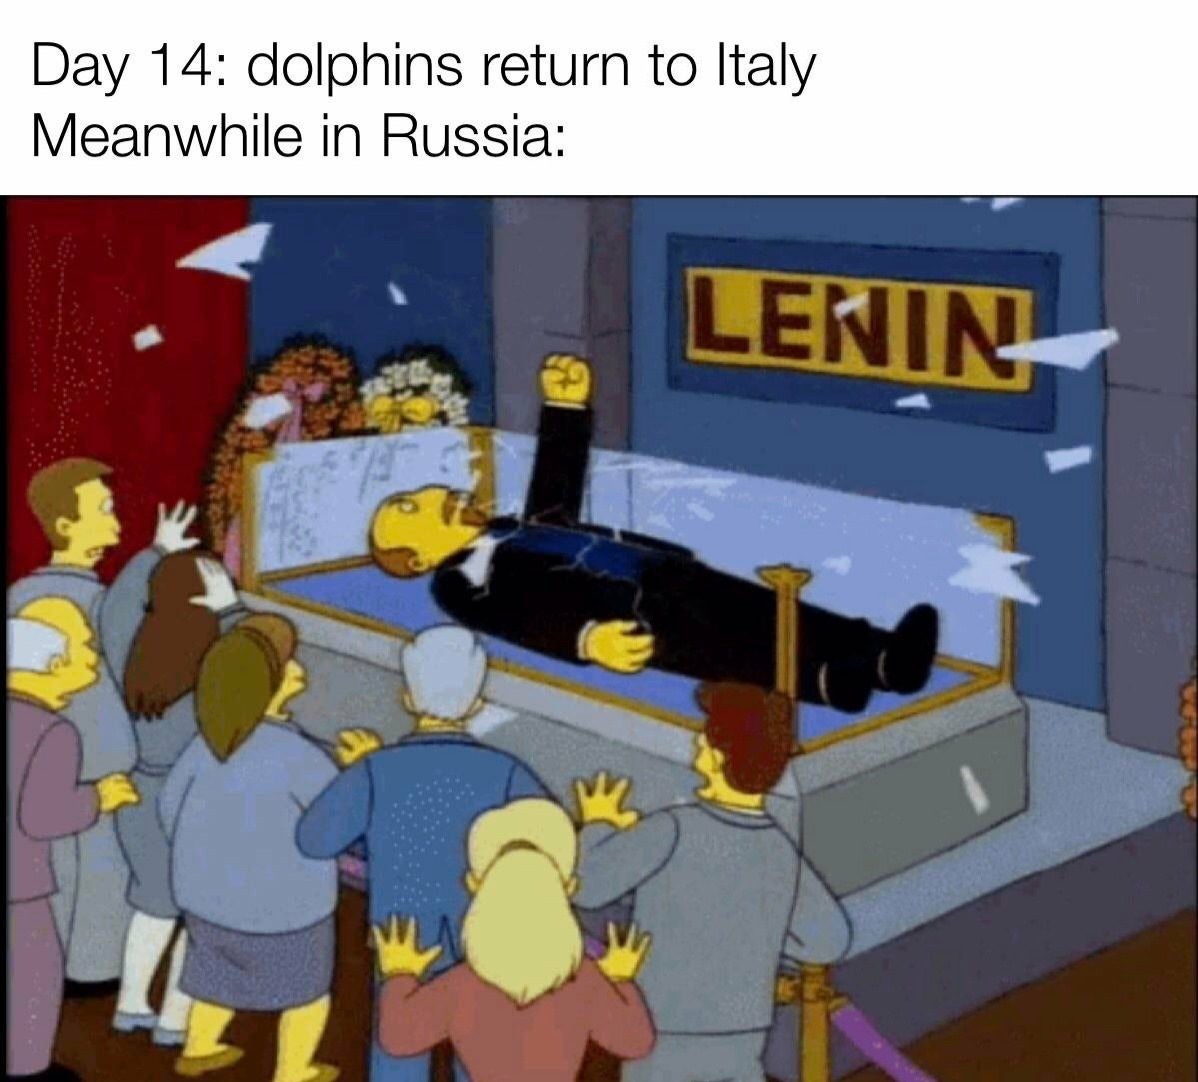 lenin tomb simpsons - Day 14: dolphins return to Italy - Meanwhile in Russia Lenin breaking out of his tomb